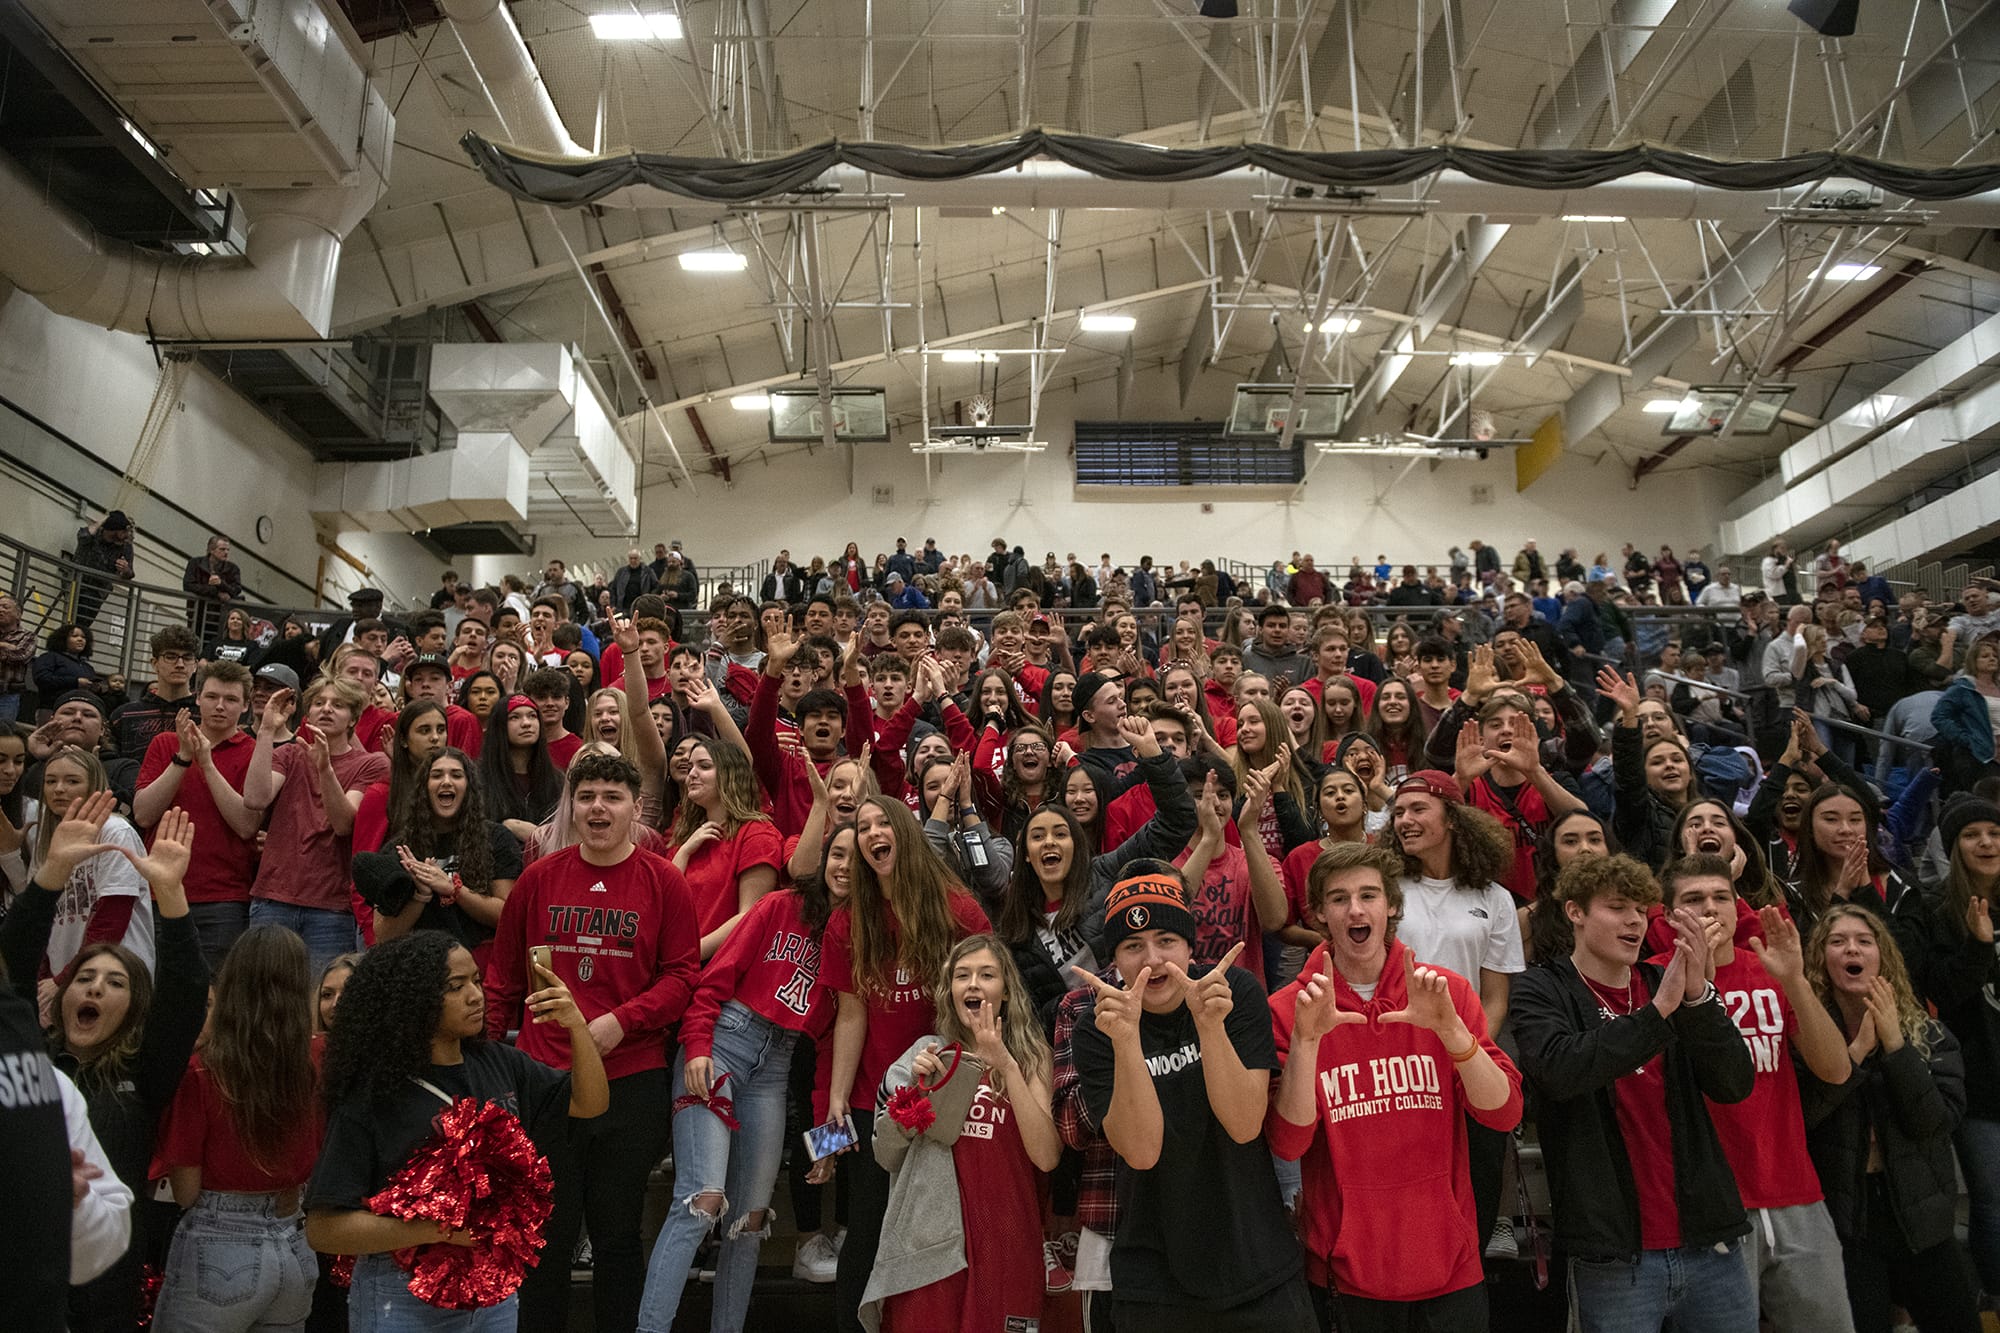 Union High School’s student section celebrates their team’s win over Gonzaga Prep at Battle Ground High School on Saturday evening, Feb. 29, 2020.